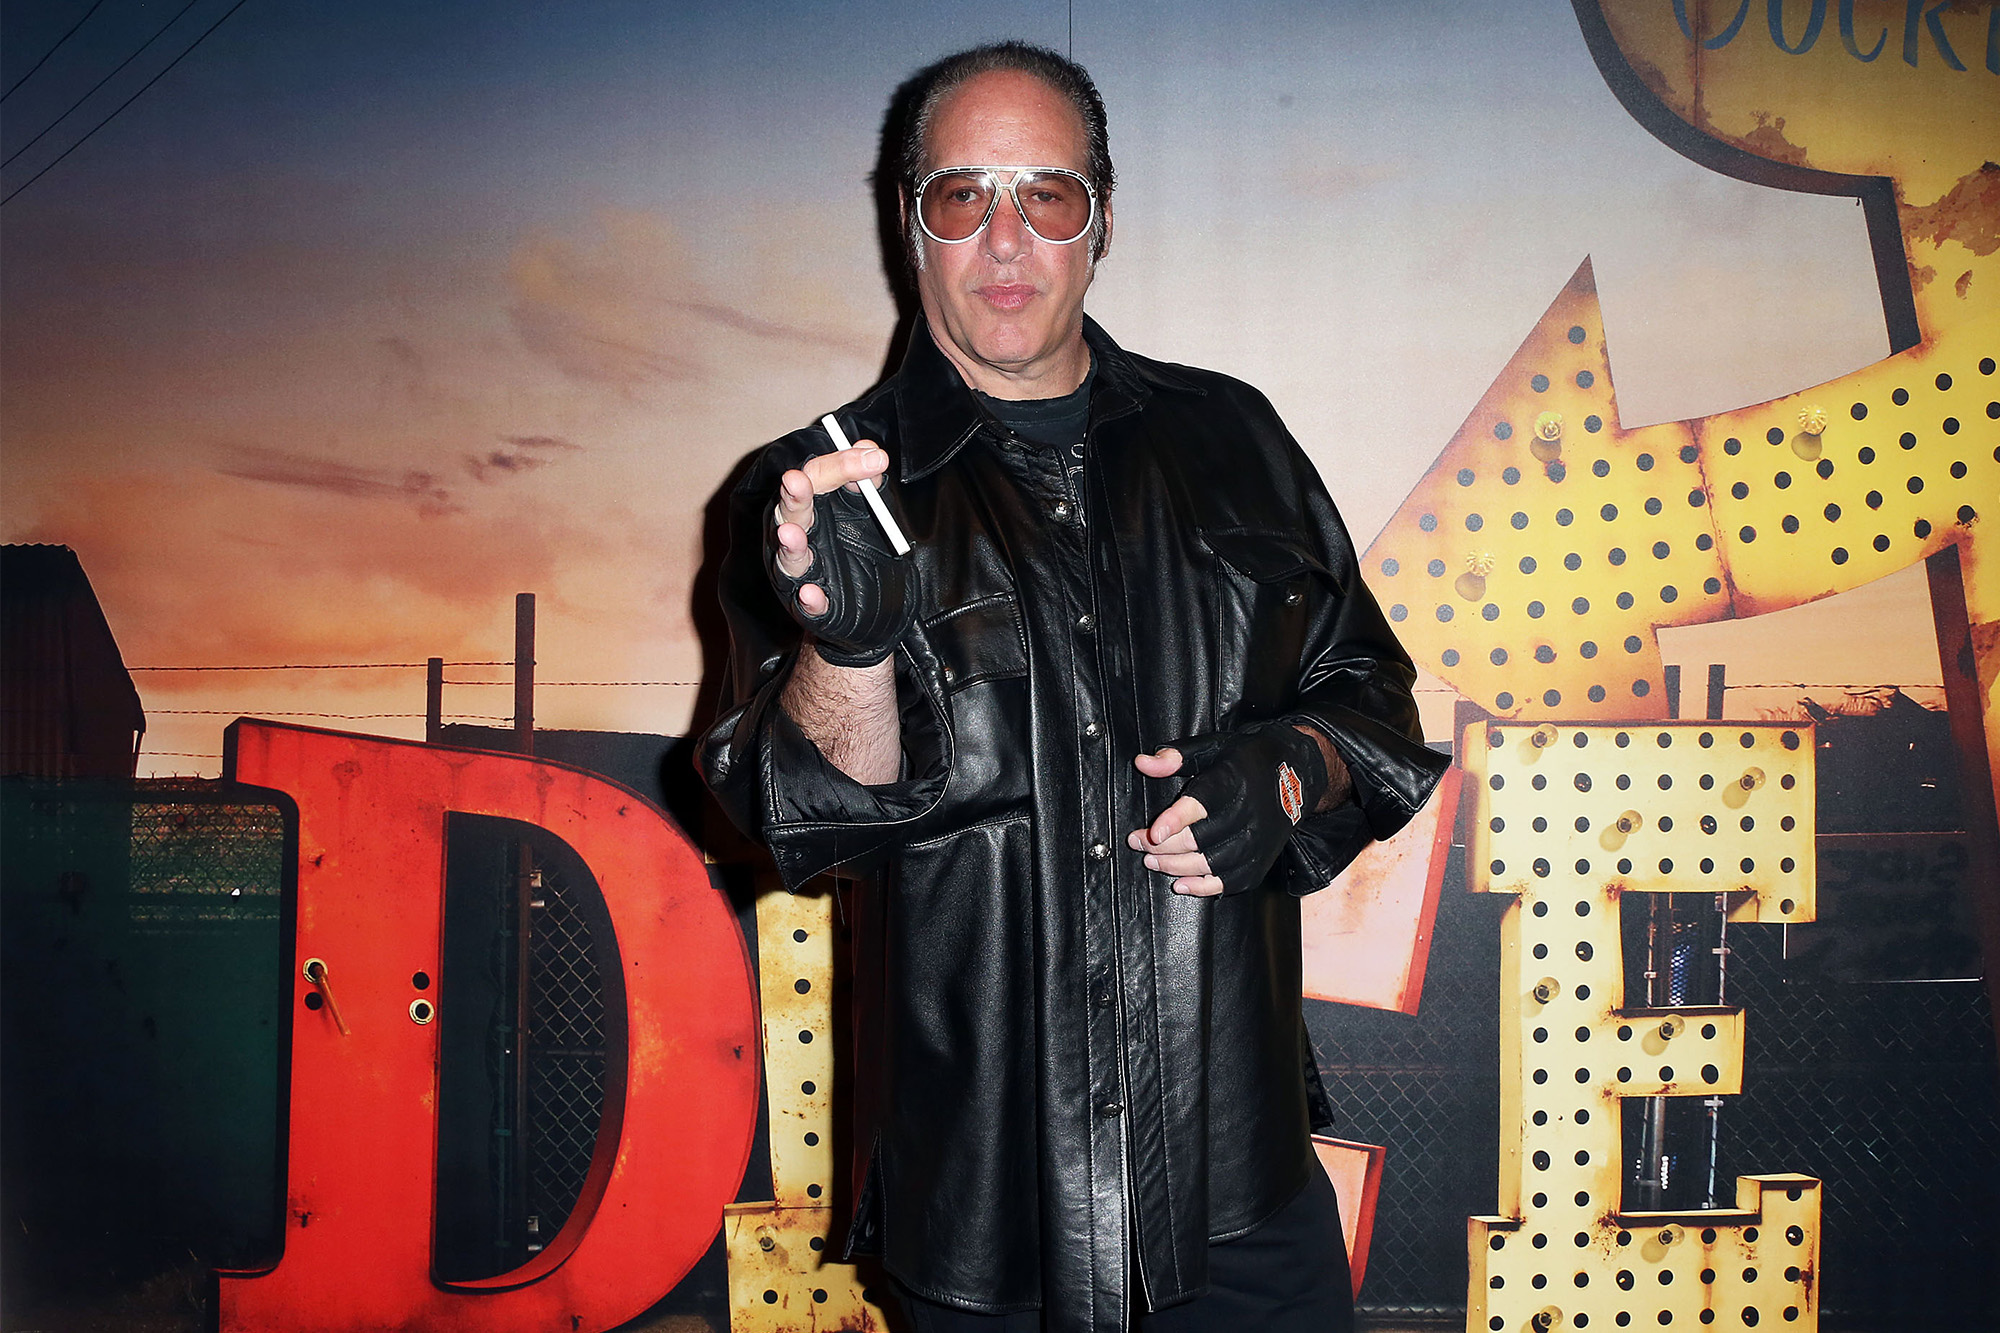 Andrew Dice Clay comedy tour 2023 Tickets, dates and prices